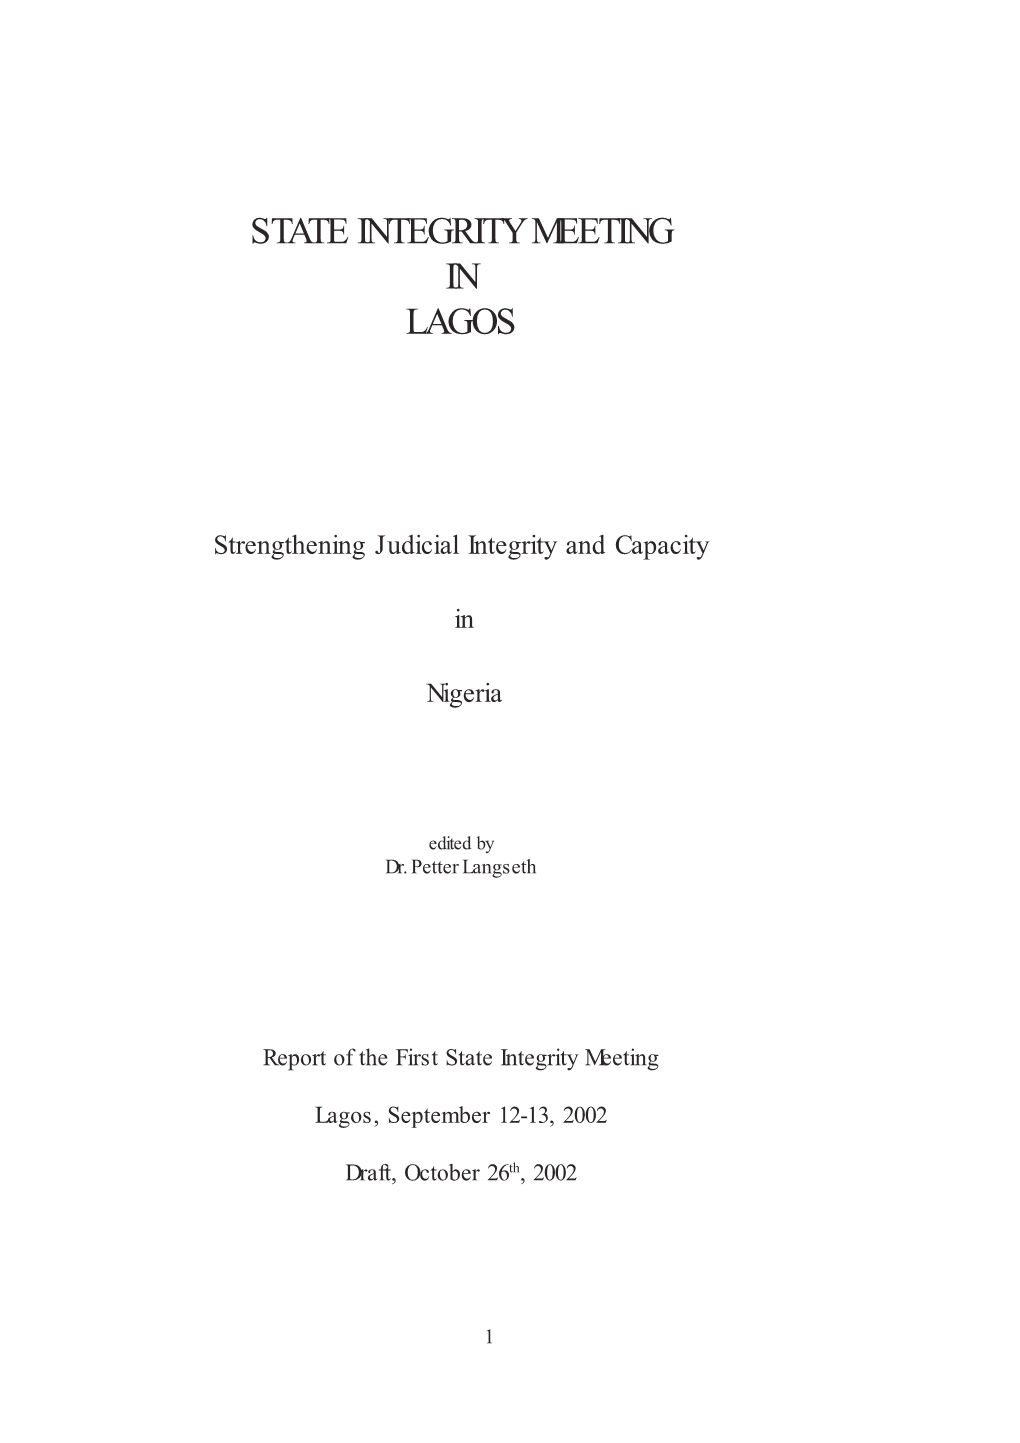 State Integrity Meeting in Lagos